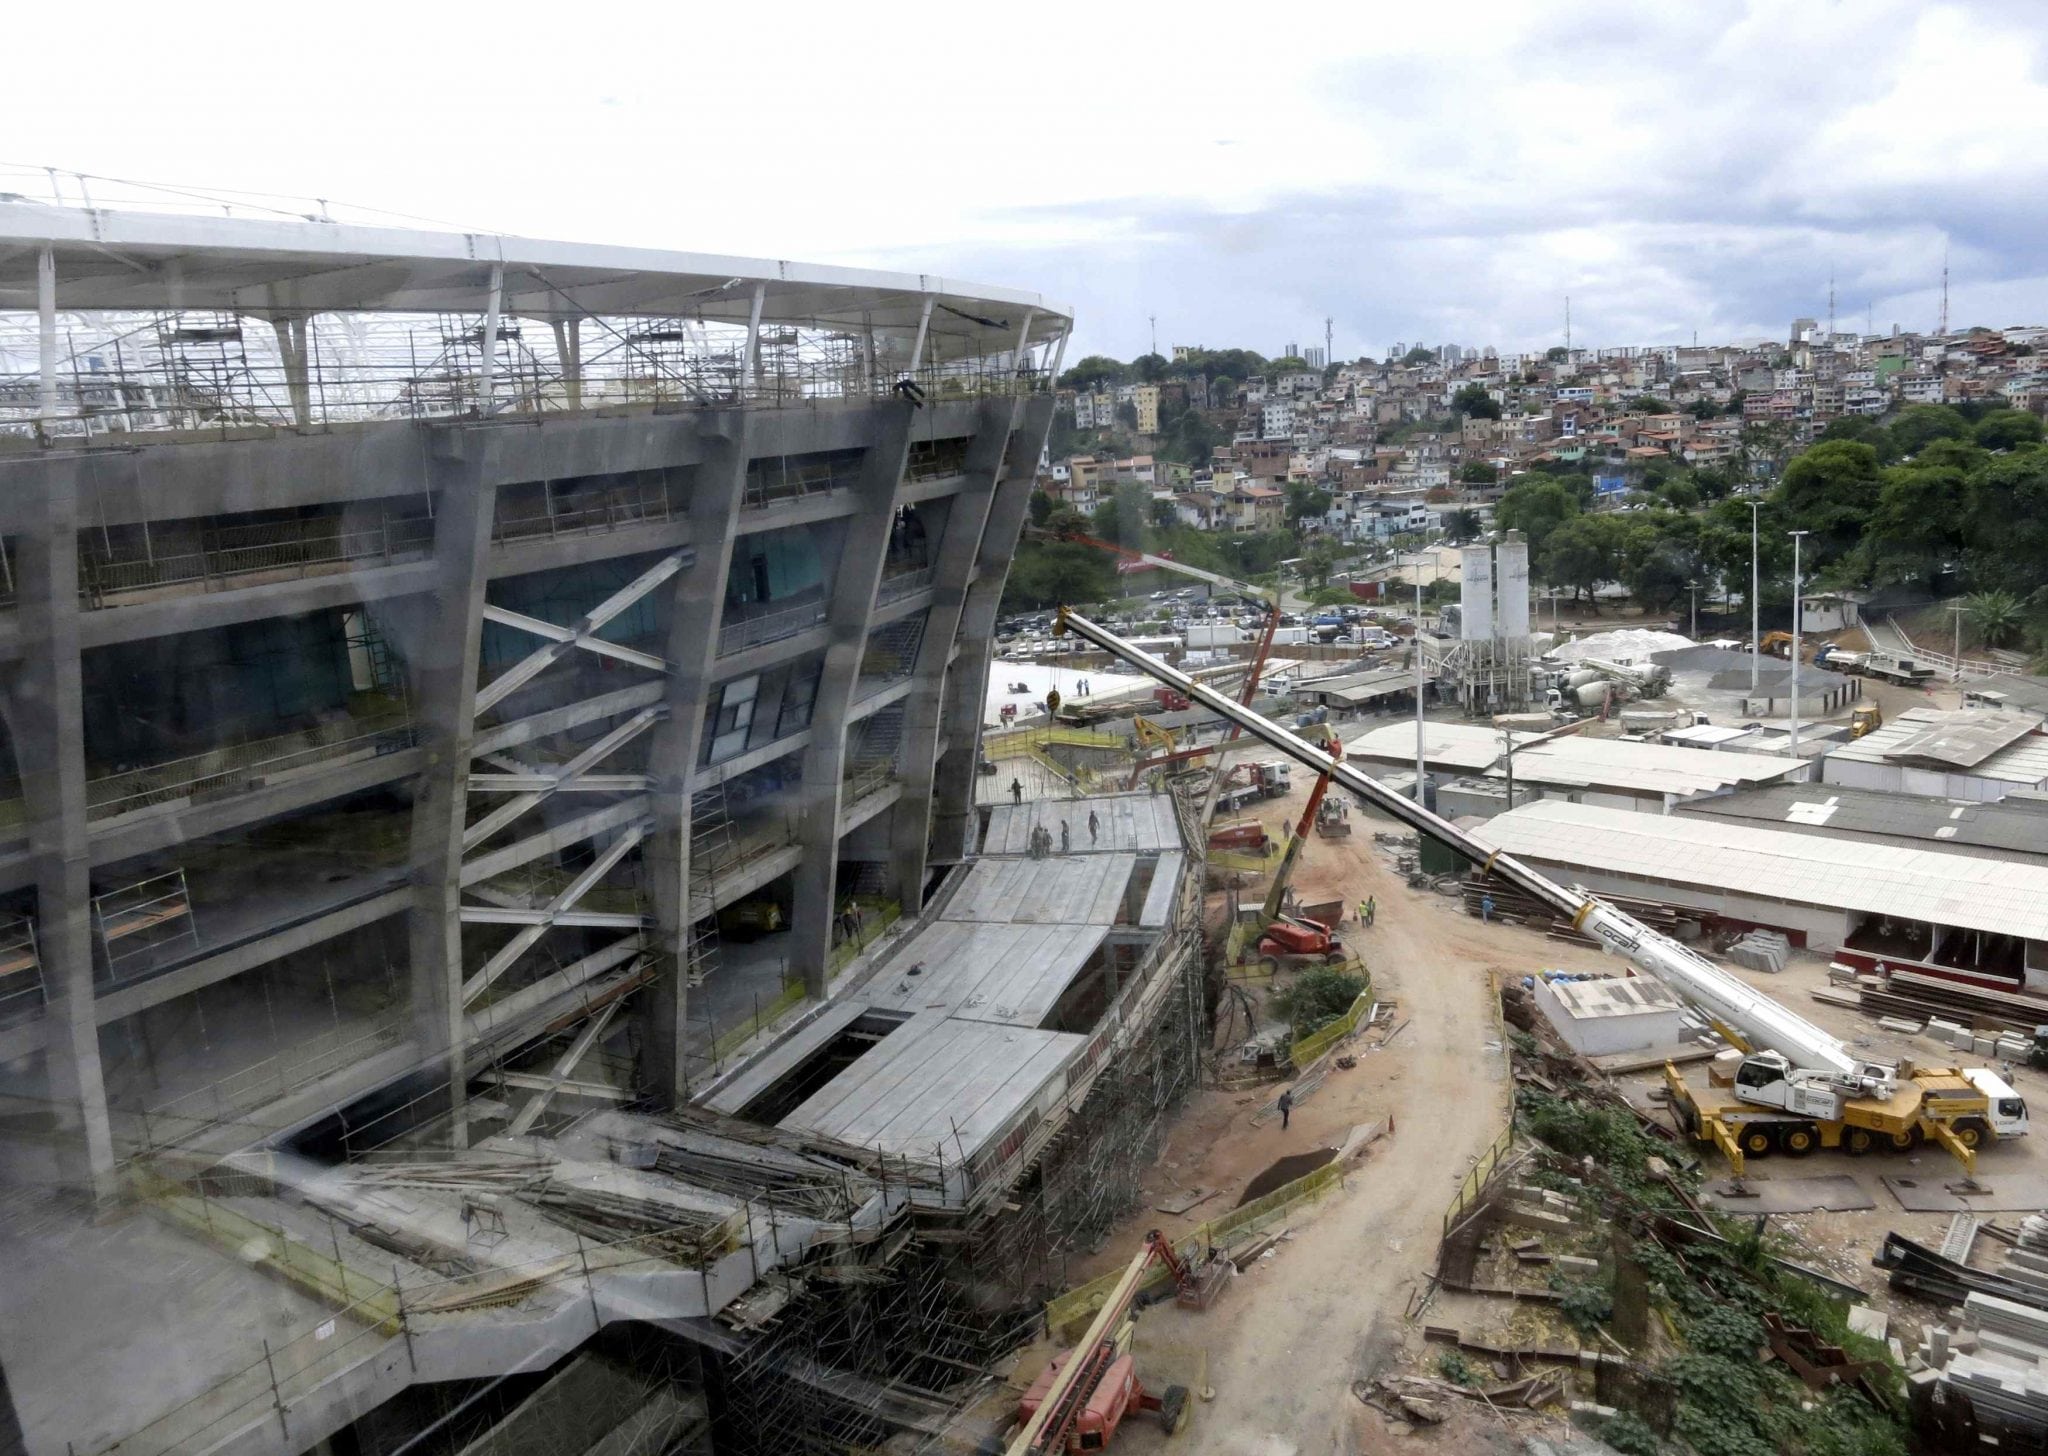 The Arena Fonte Nova is seen as construction of the 2014 World Cup soccer stadium continues in Salvador, Brazil